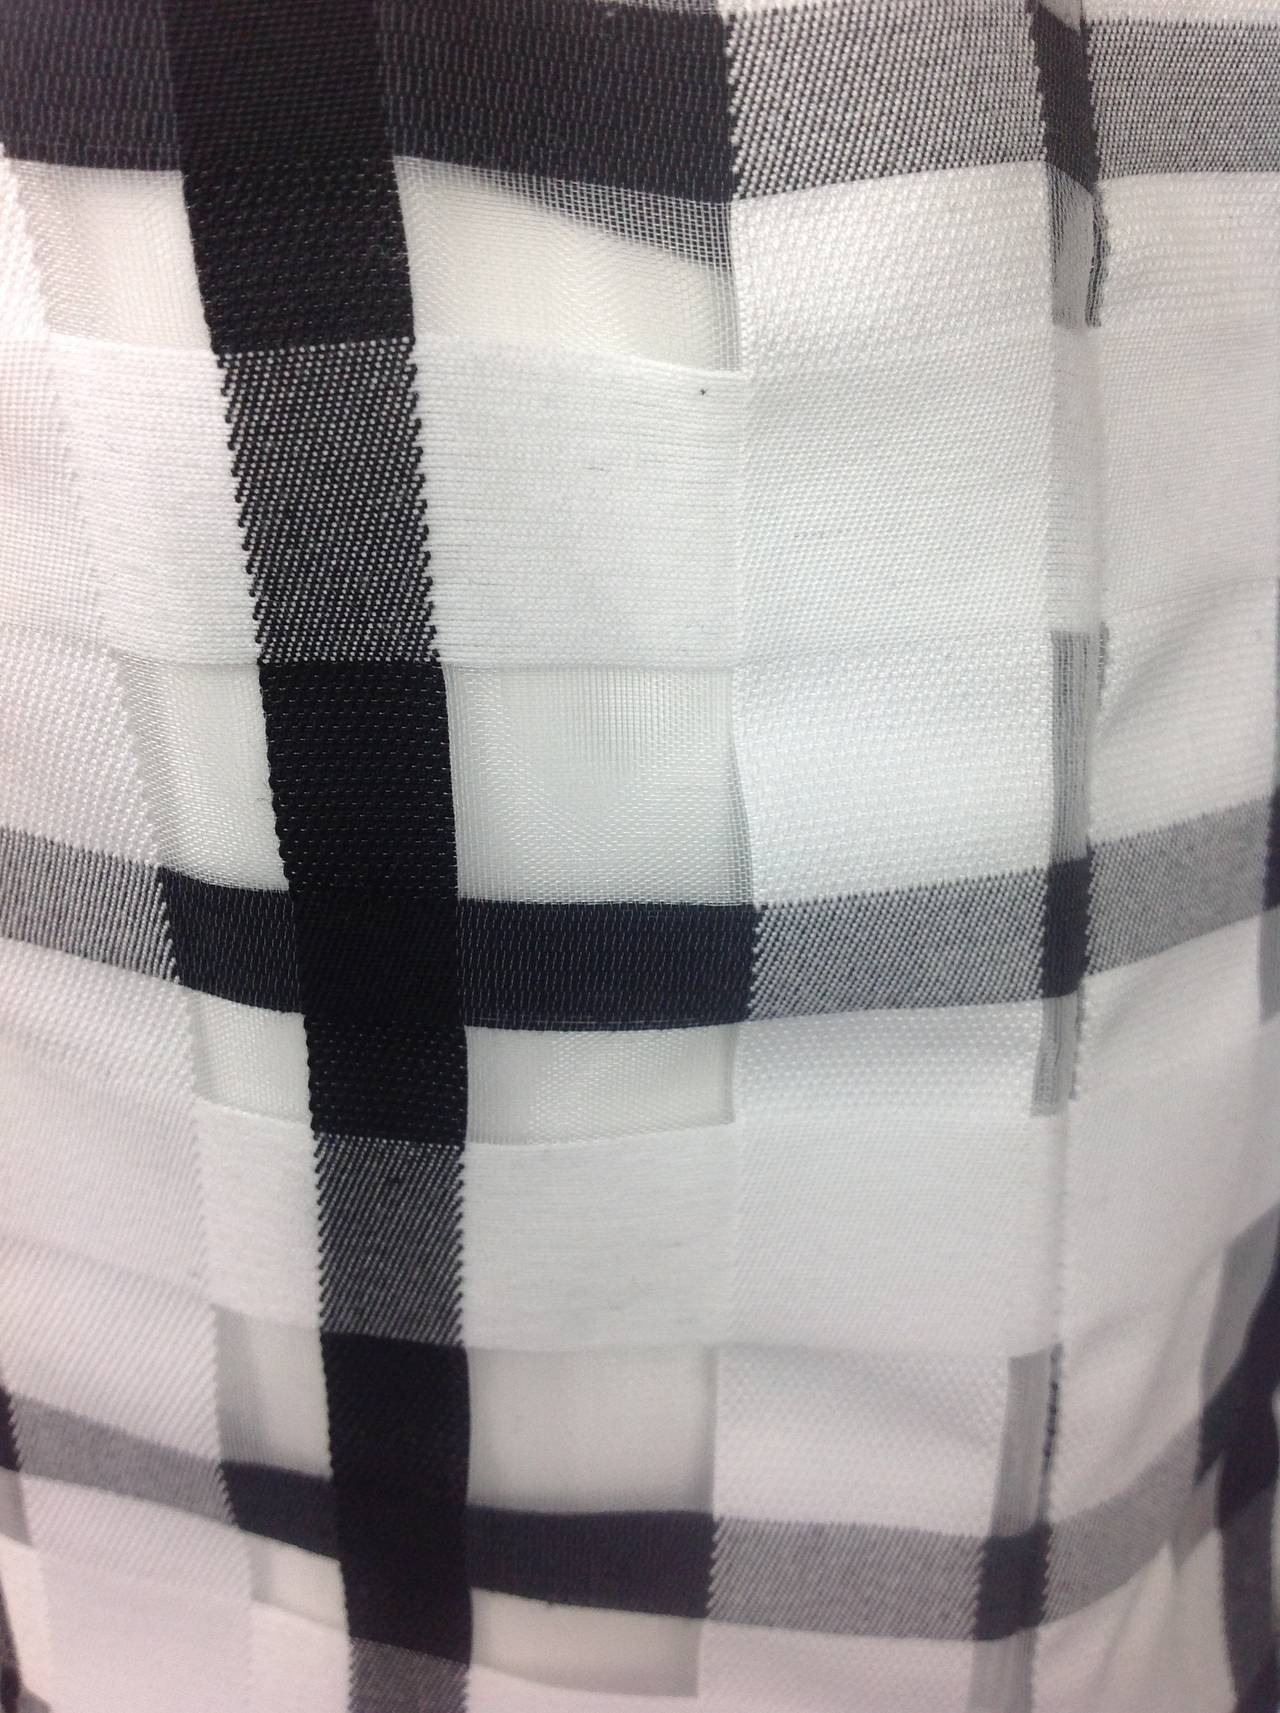 Black and White Marni Plaid Dress   Size 38 In Excellent Condition For Sale In Palm Beach, FL